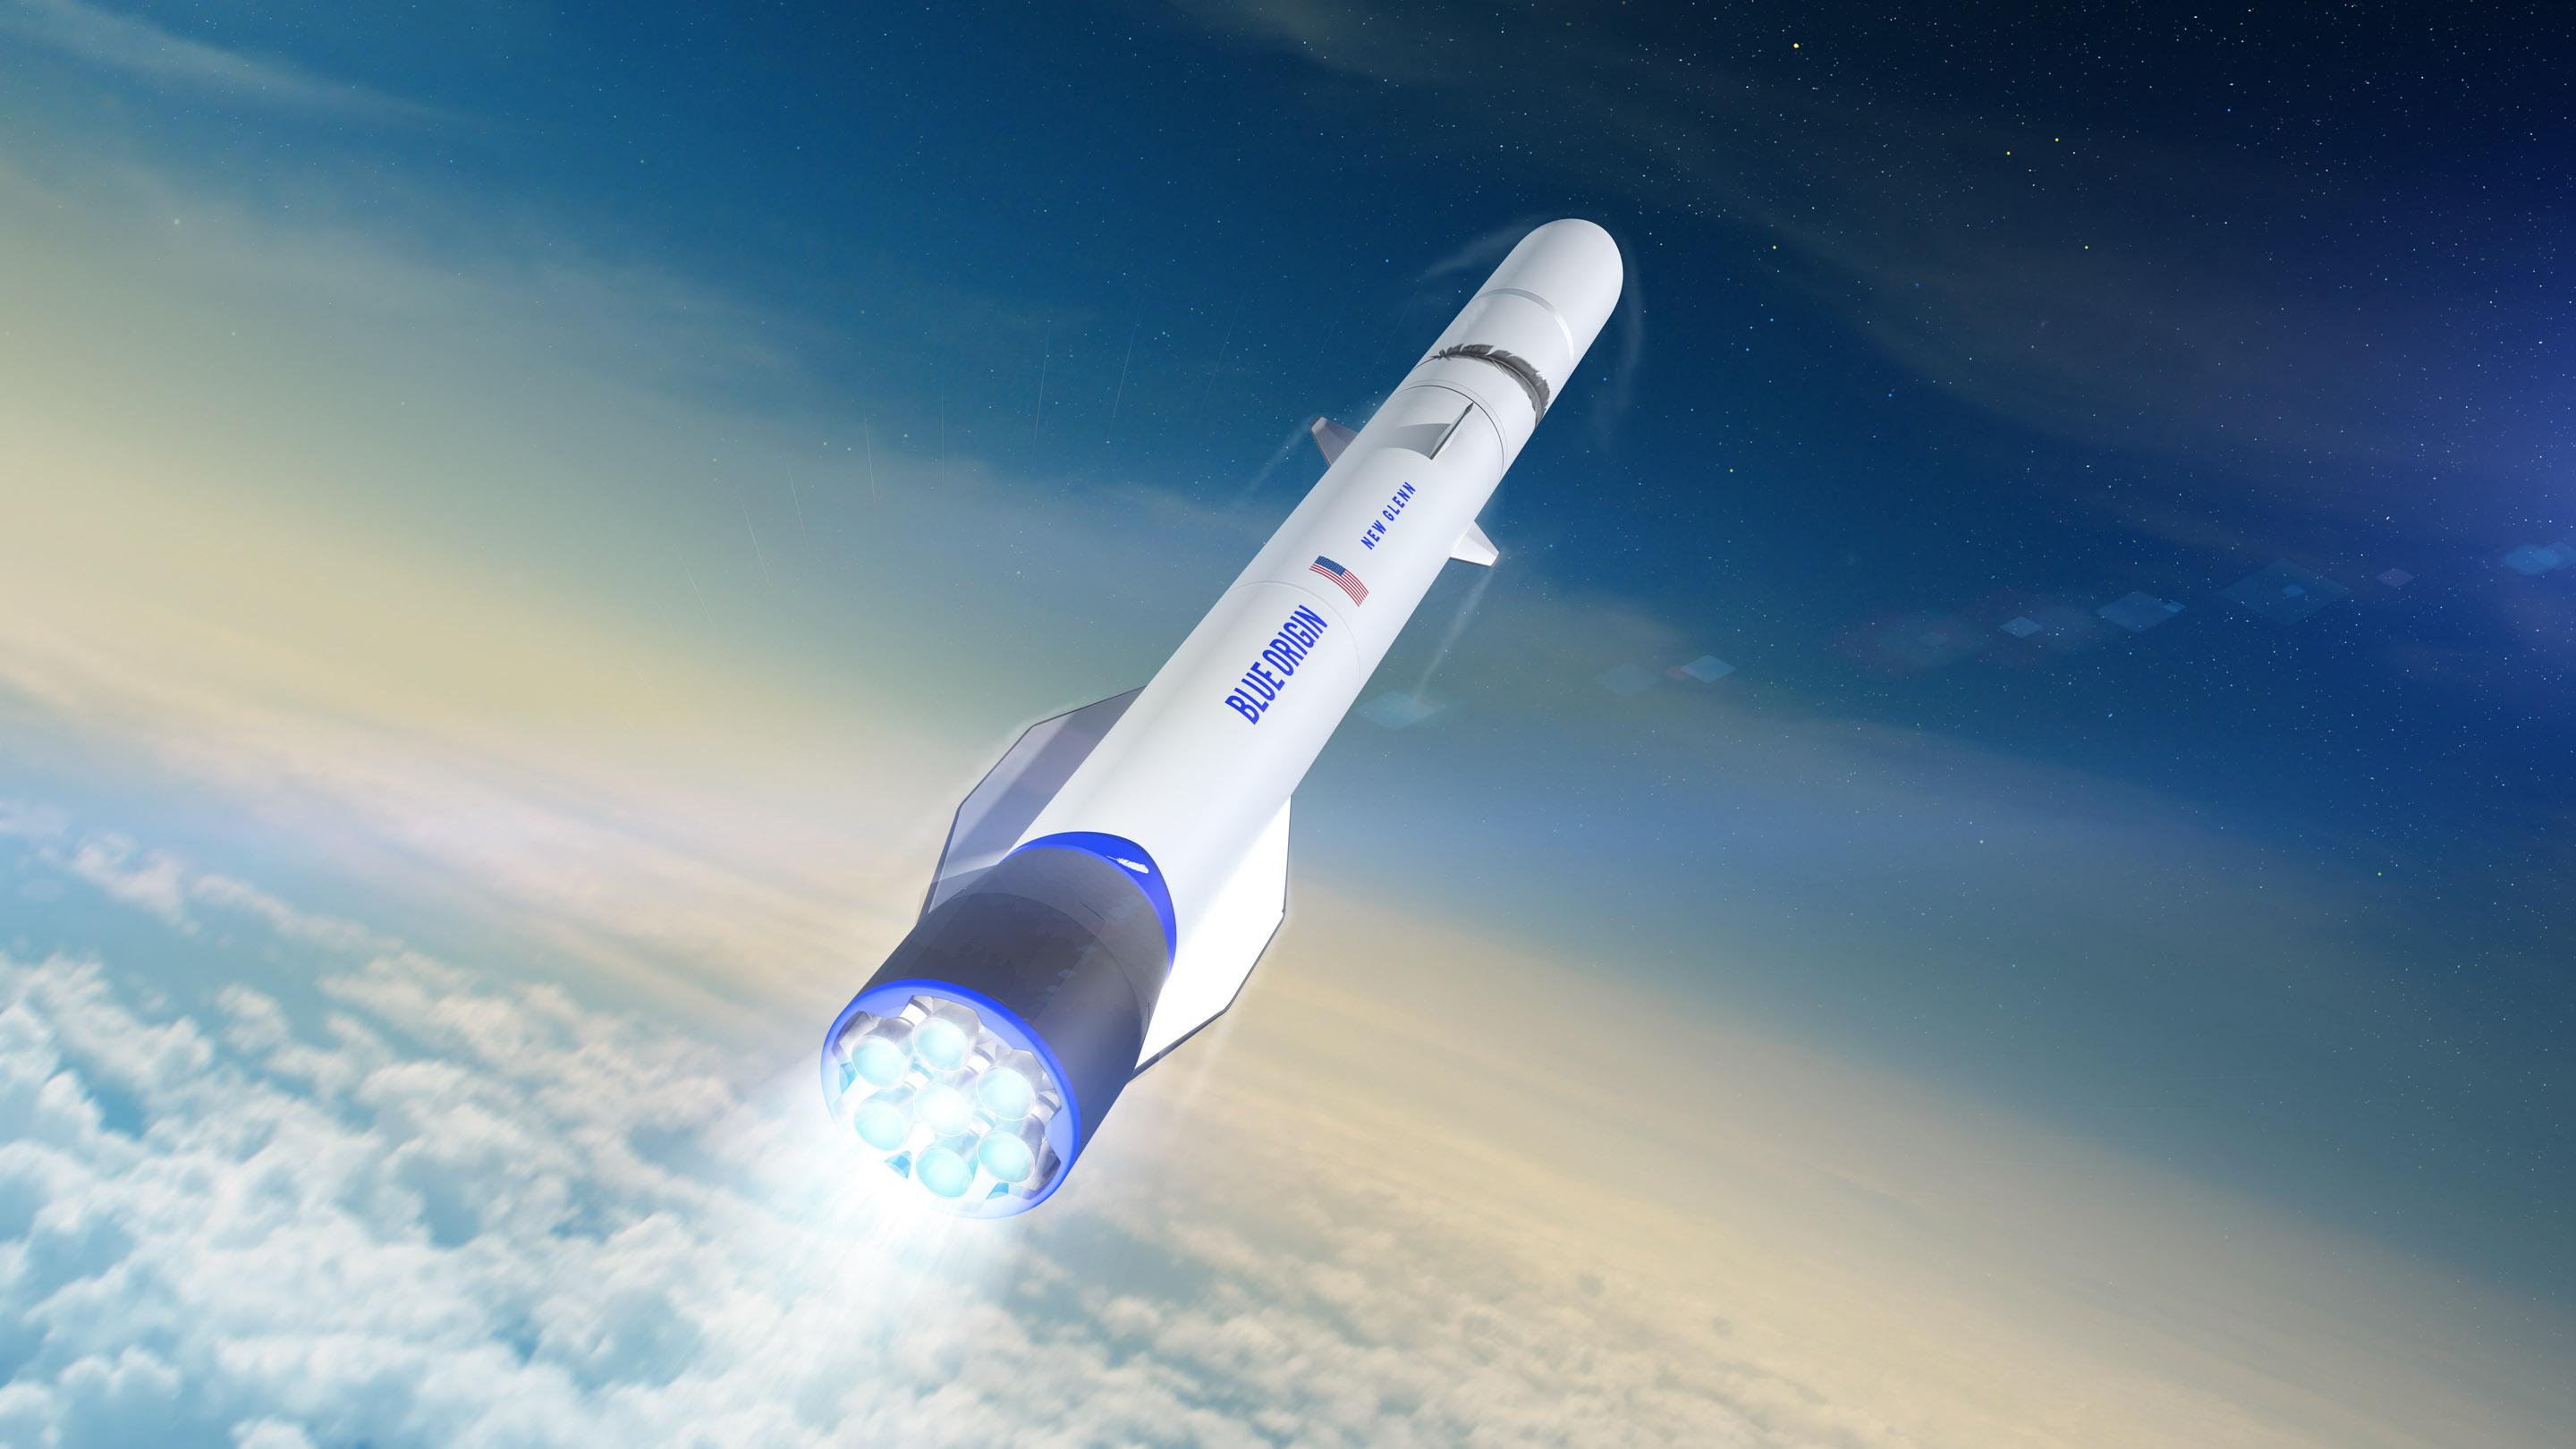 The Air Force evidently likes what it sees in Blue Origin's New Glenn rocket.